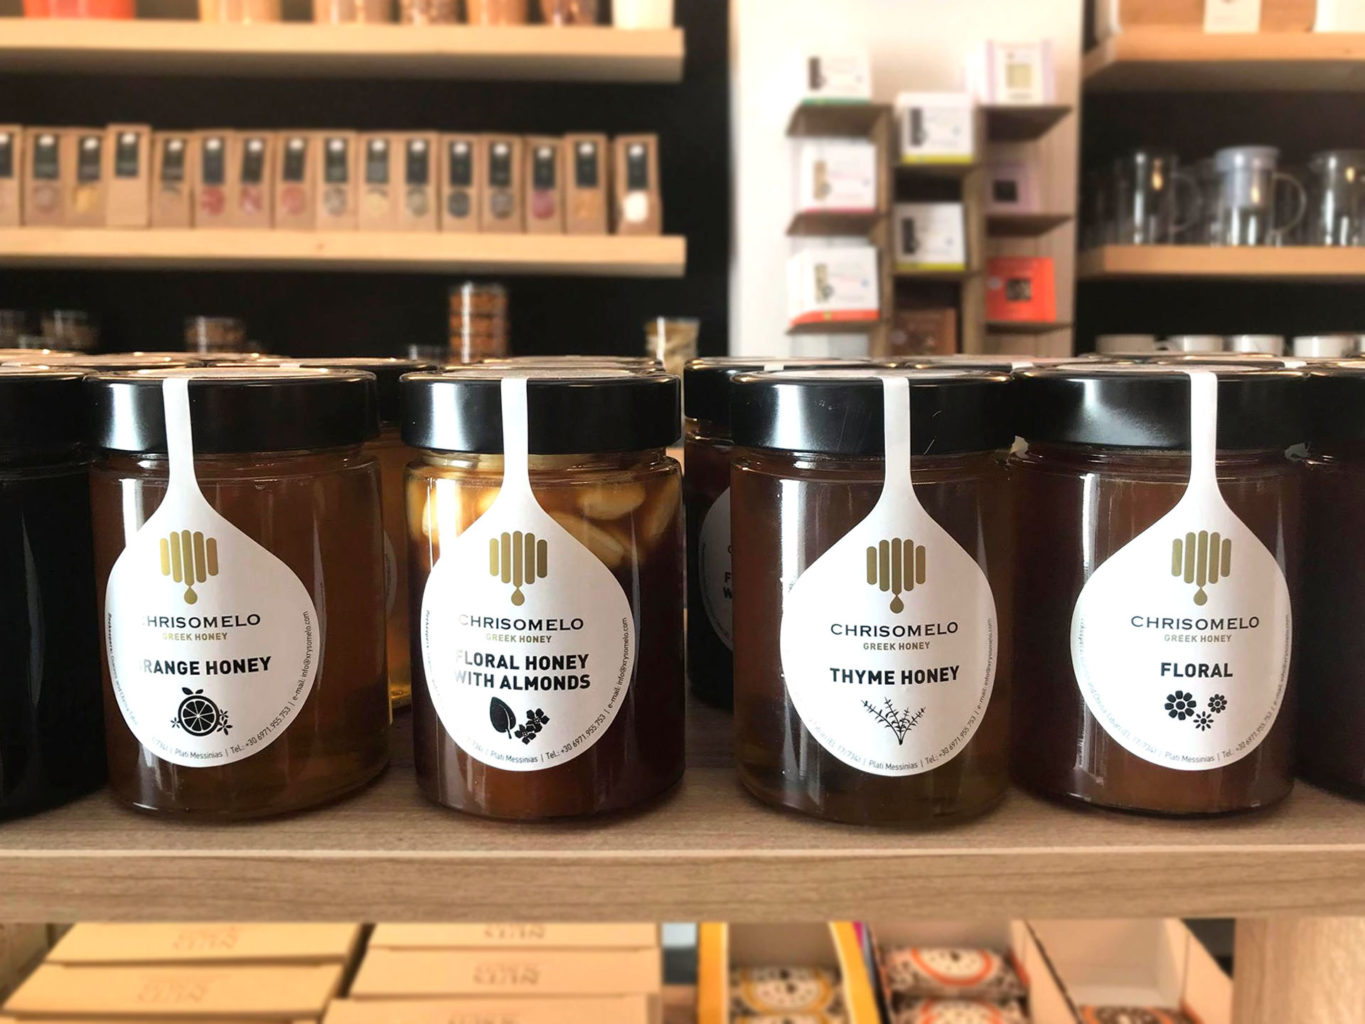 Chrisomelo honey packaging on wooden surface